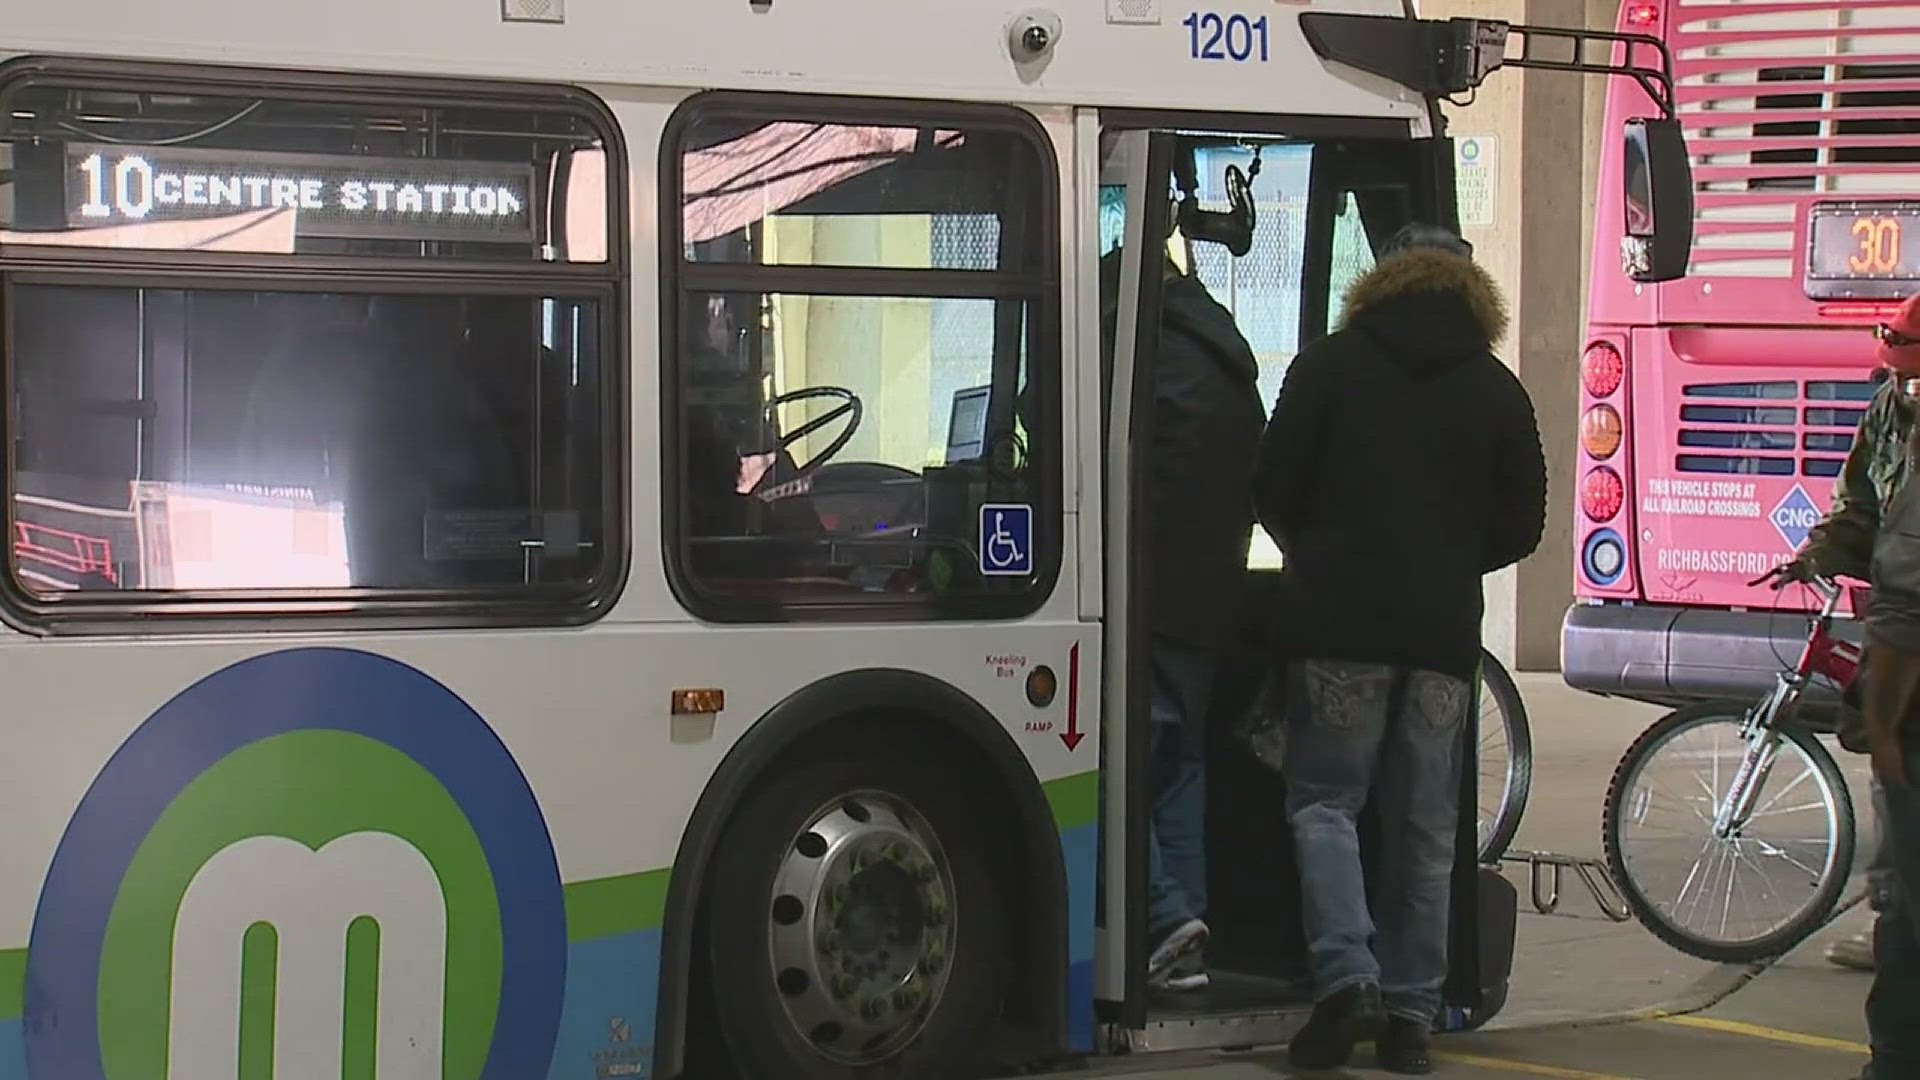 Bus riders who bring their bike can get a free ride with any of the Quad Cities bus systems. In addition, Utica Ridge Road over I-80 is closed for repairs.